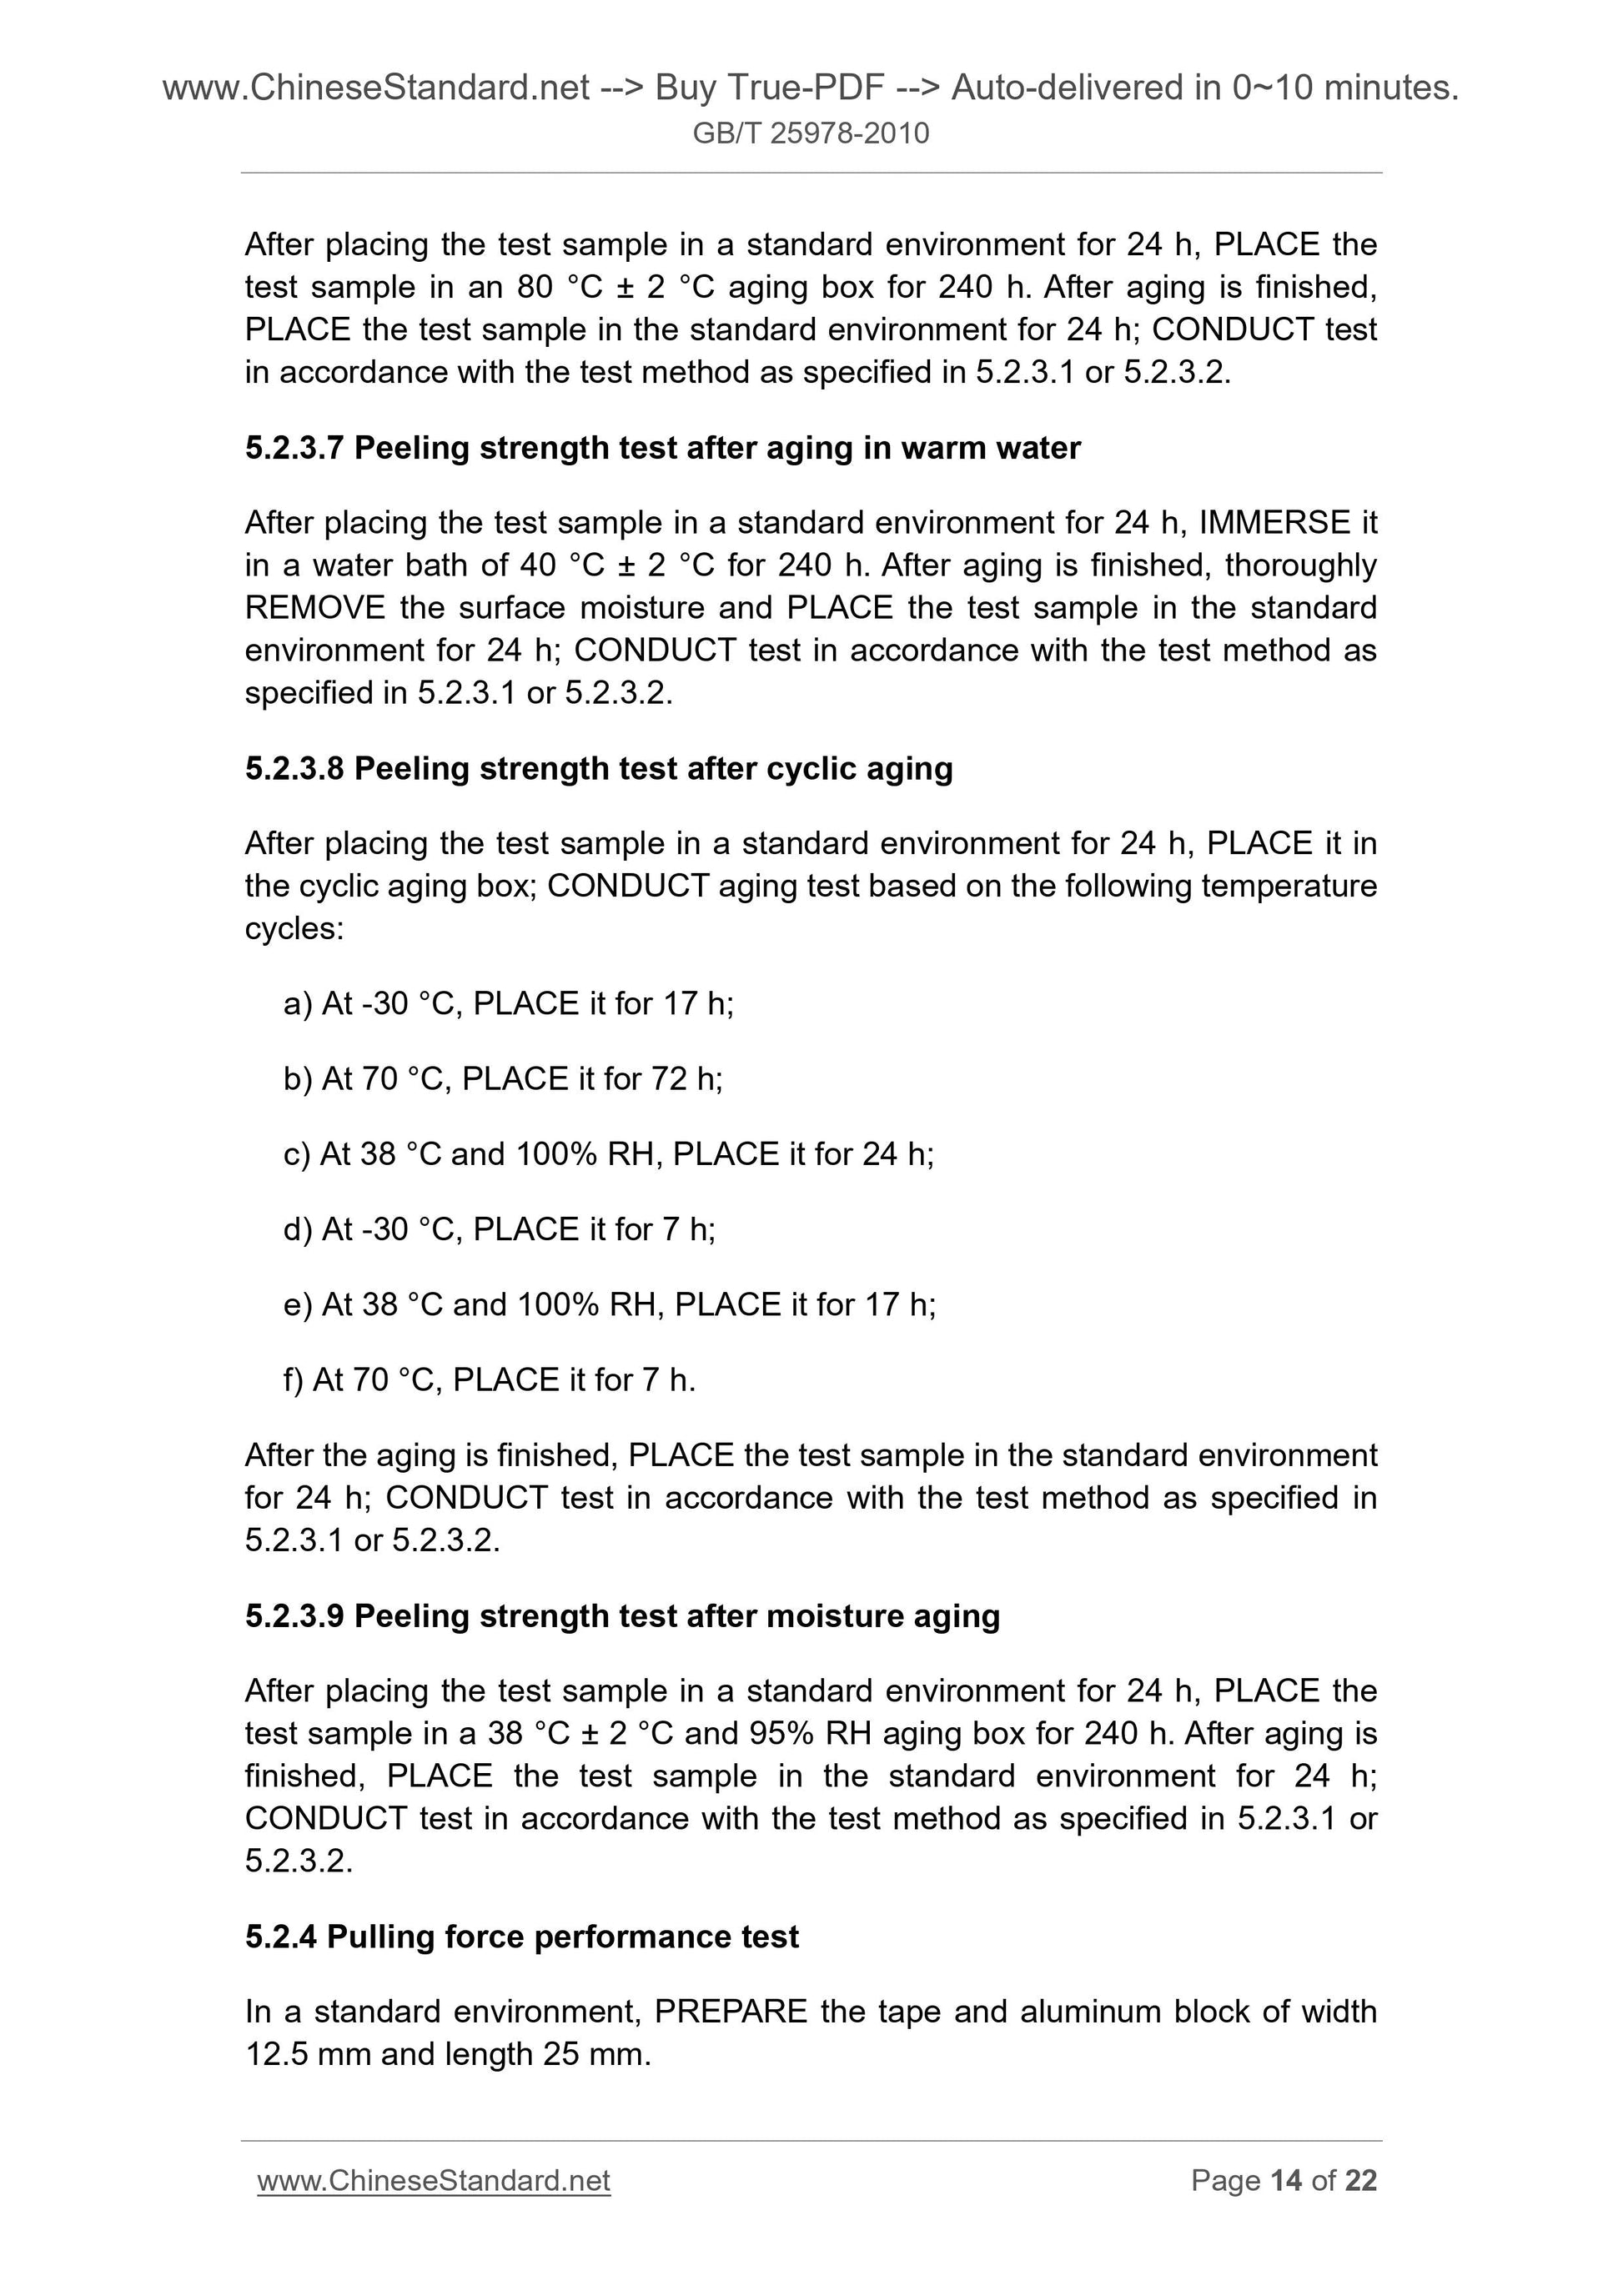 GB/T 25978-2010 Page 7